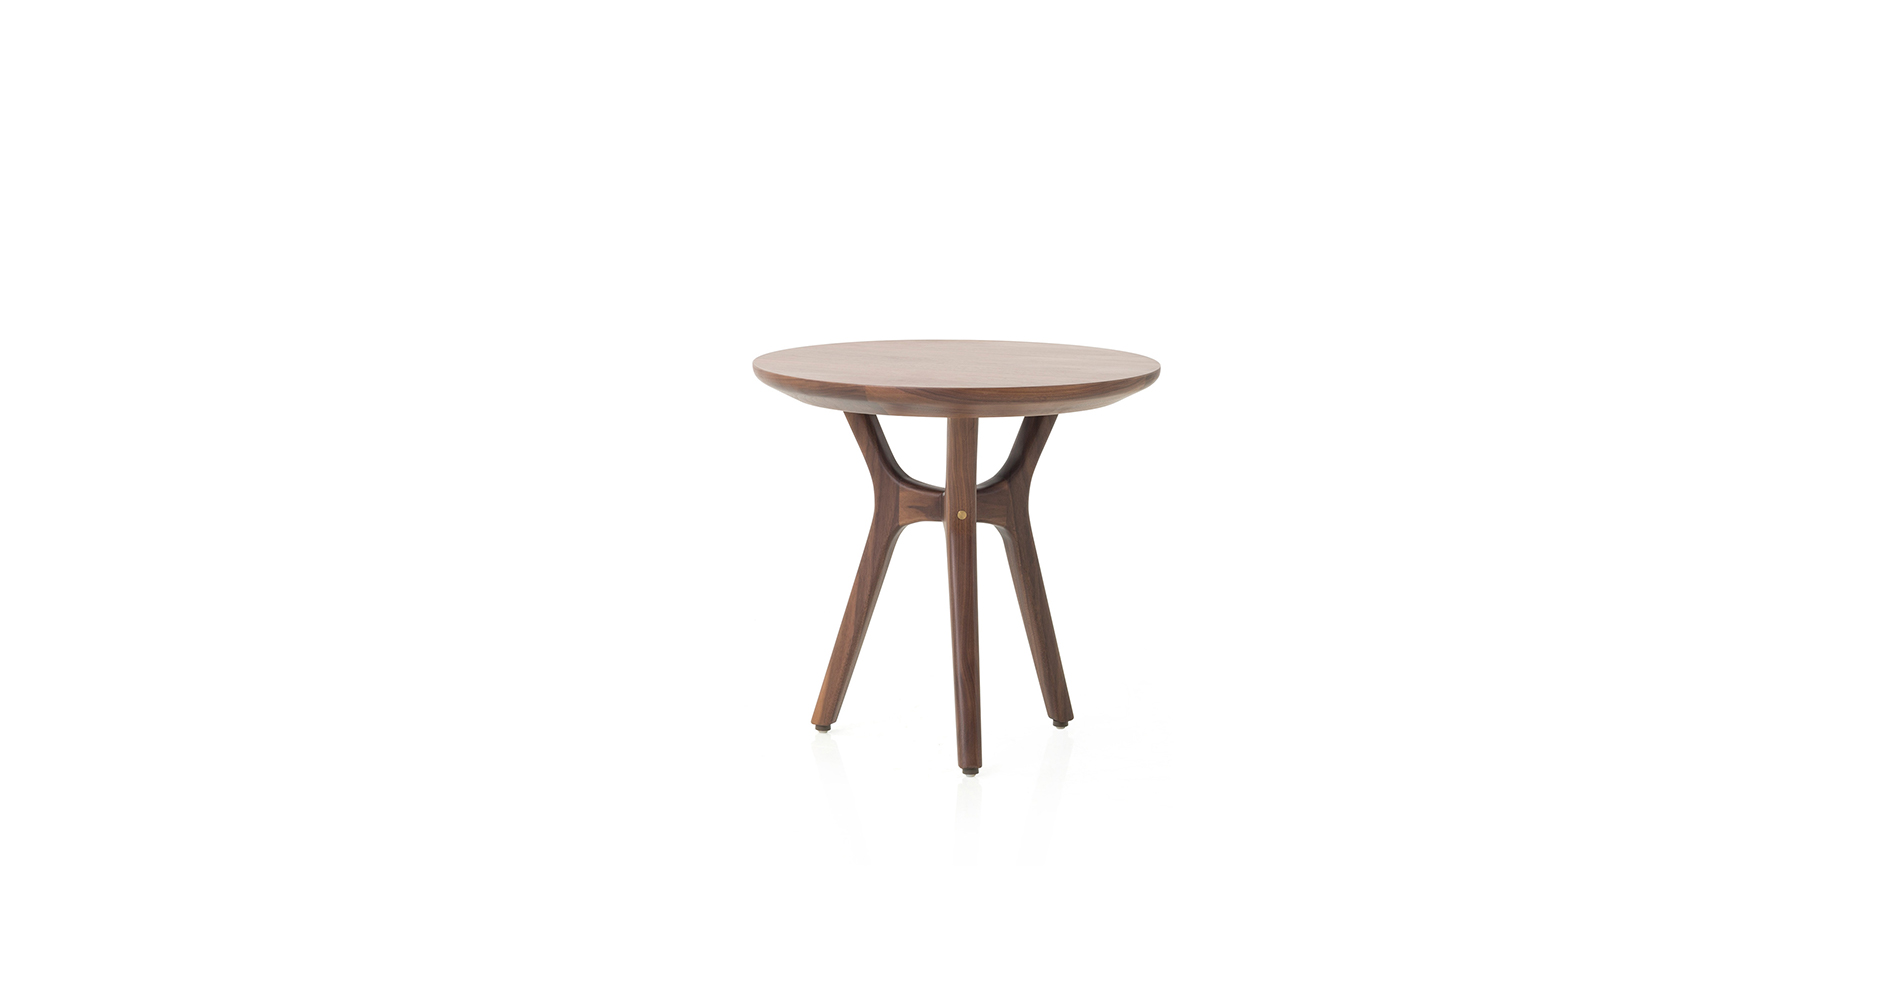 An image of Rén Side Table